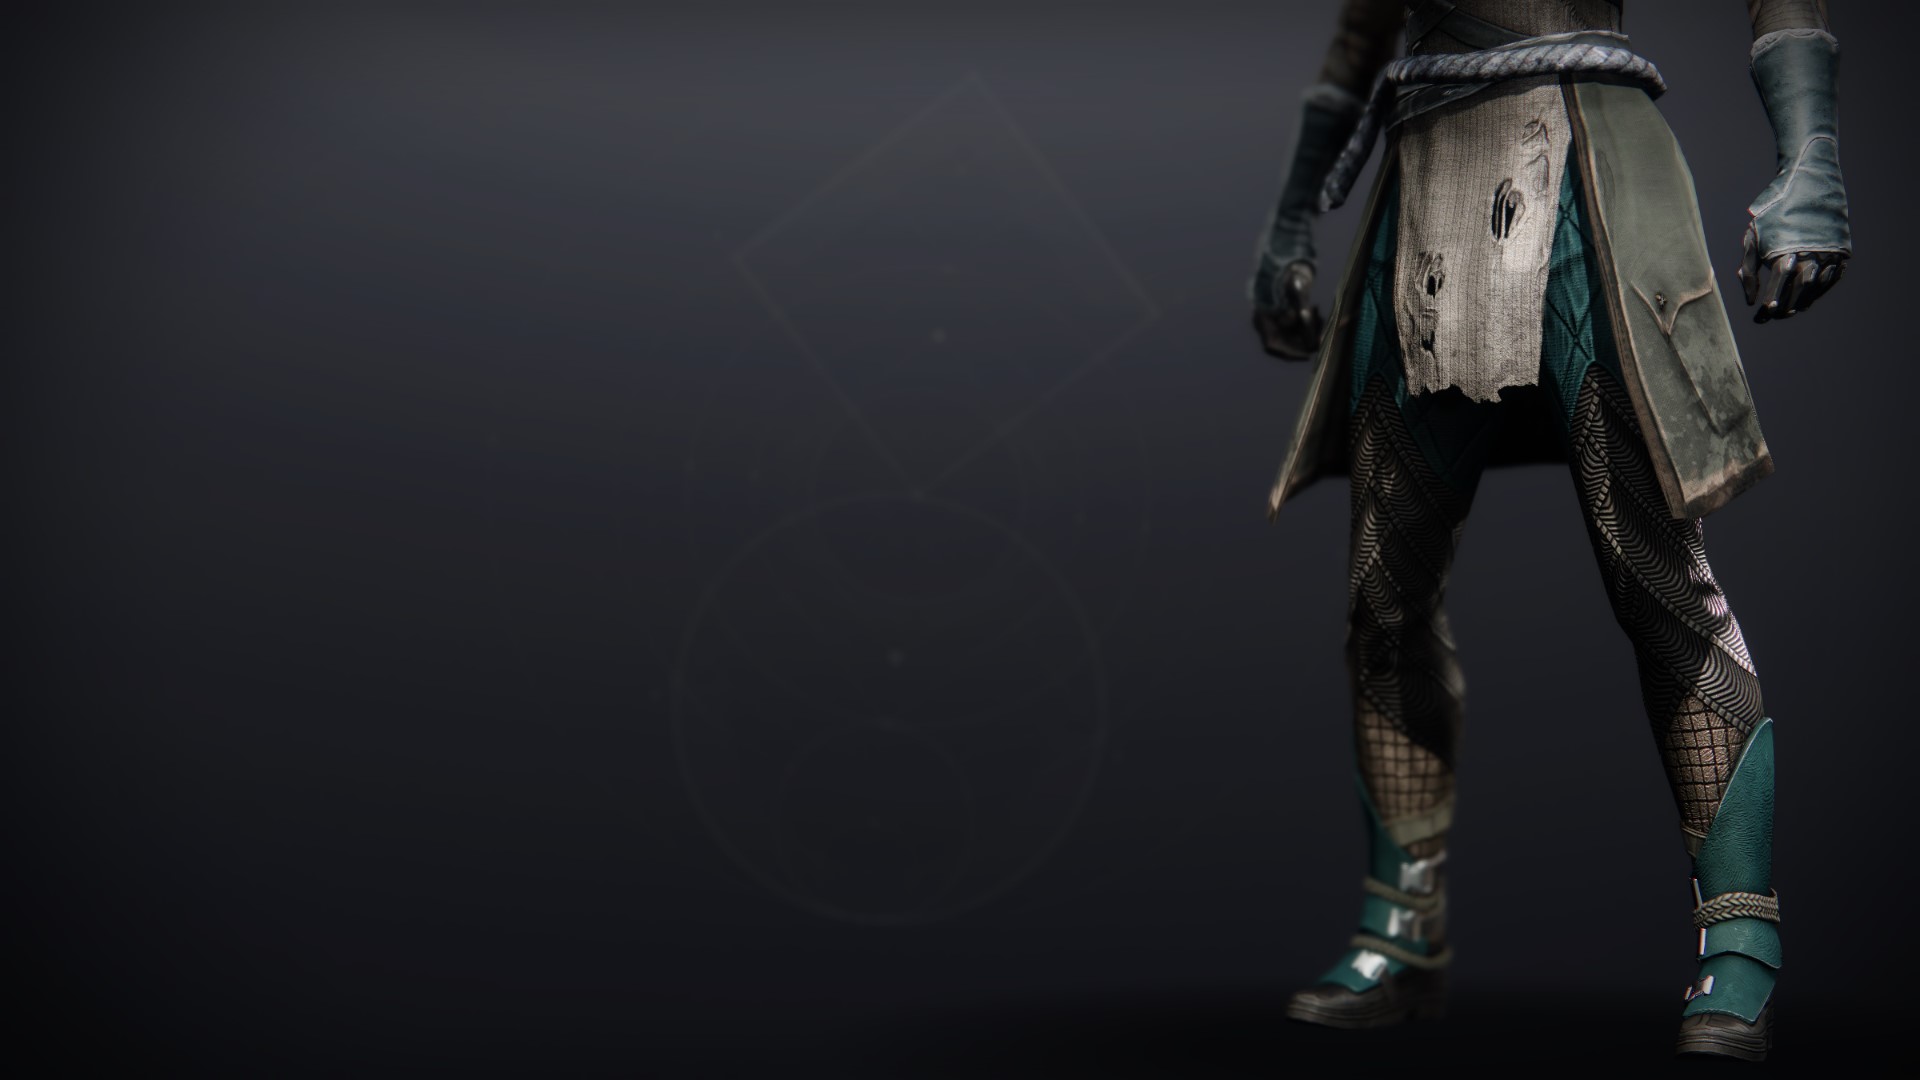 An in-game render of the Iron Forerunner Boots.